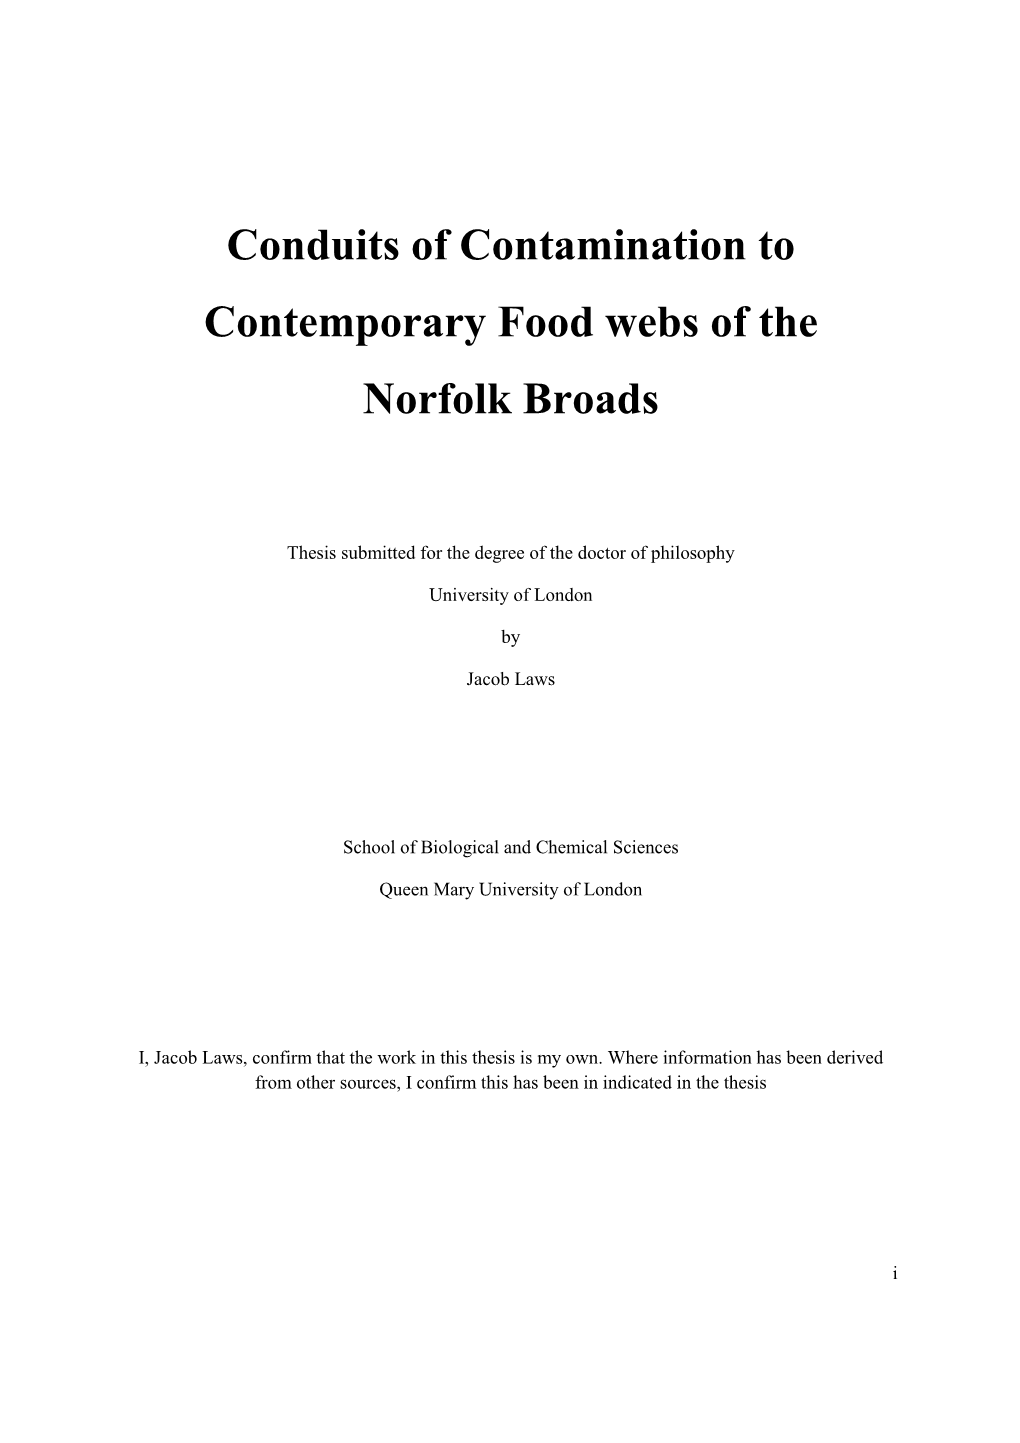 Conduits of Contamination to Contemporary Food Webs of the Norfolk Broads